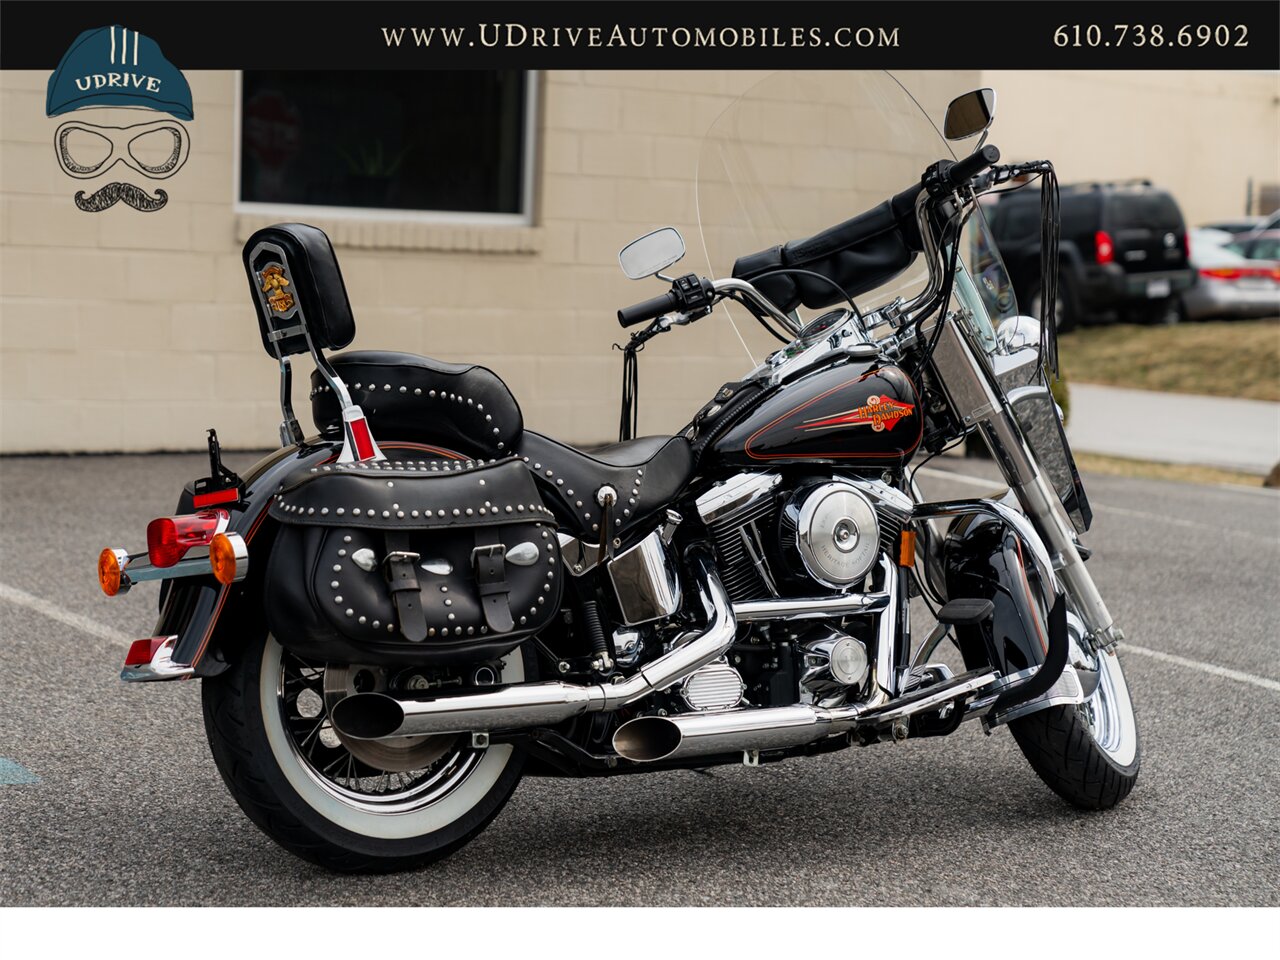 1994 Harley-Davidson Touring FLSTC  Heritage Softail Classic 2k Miles 1 Owner Service History - Photo 28 - West Chester, PA 19382